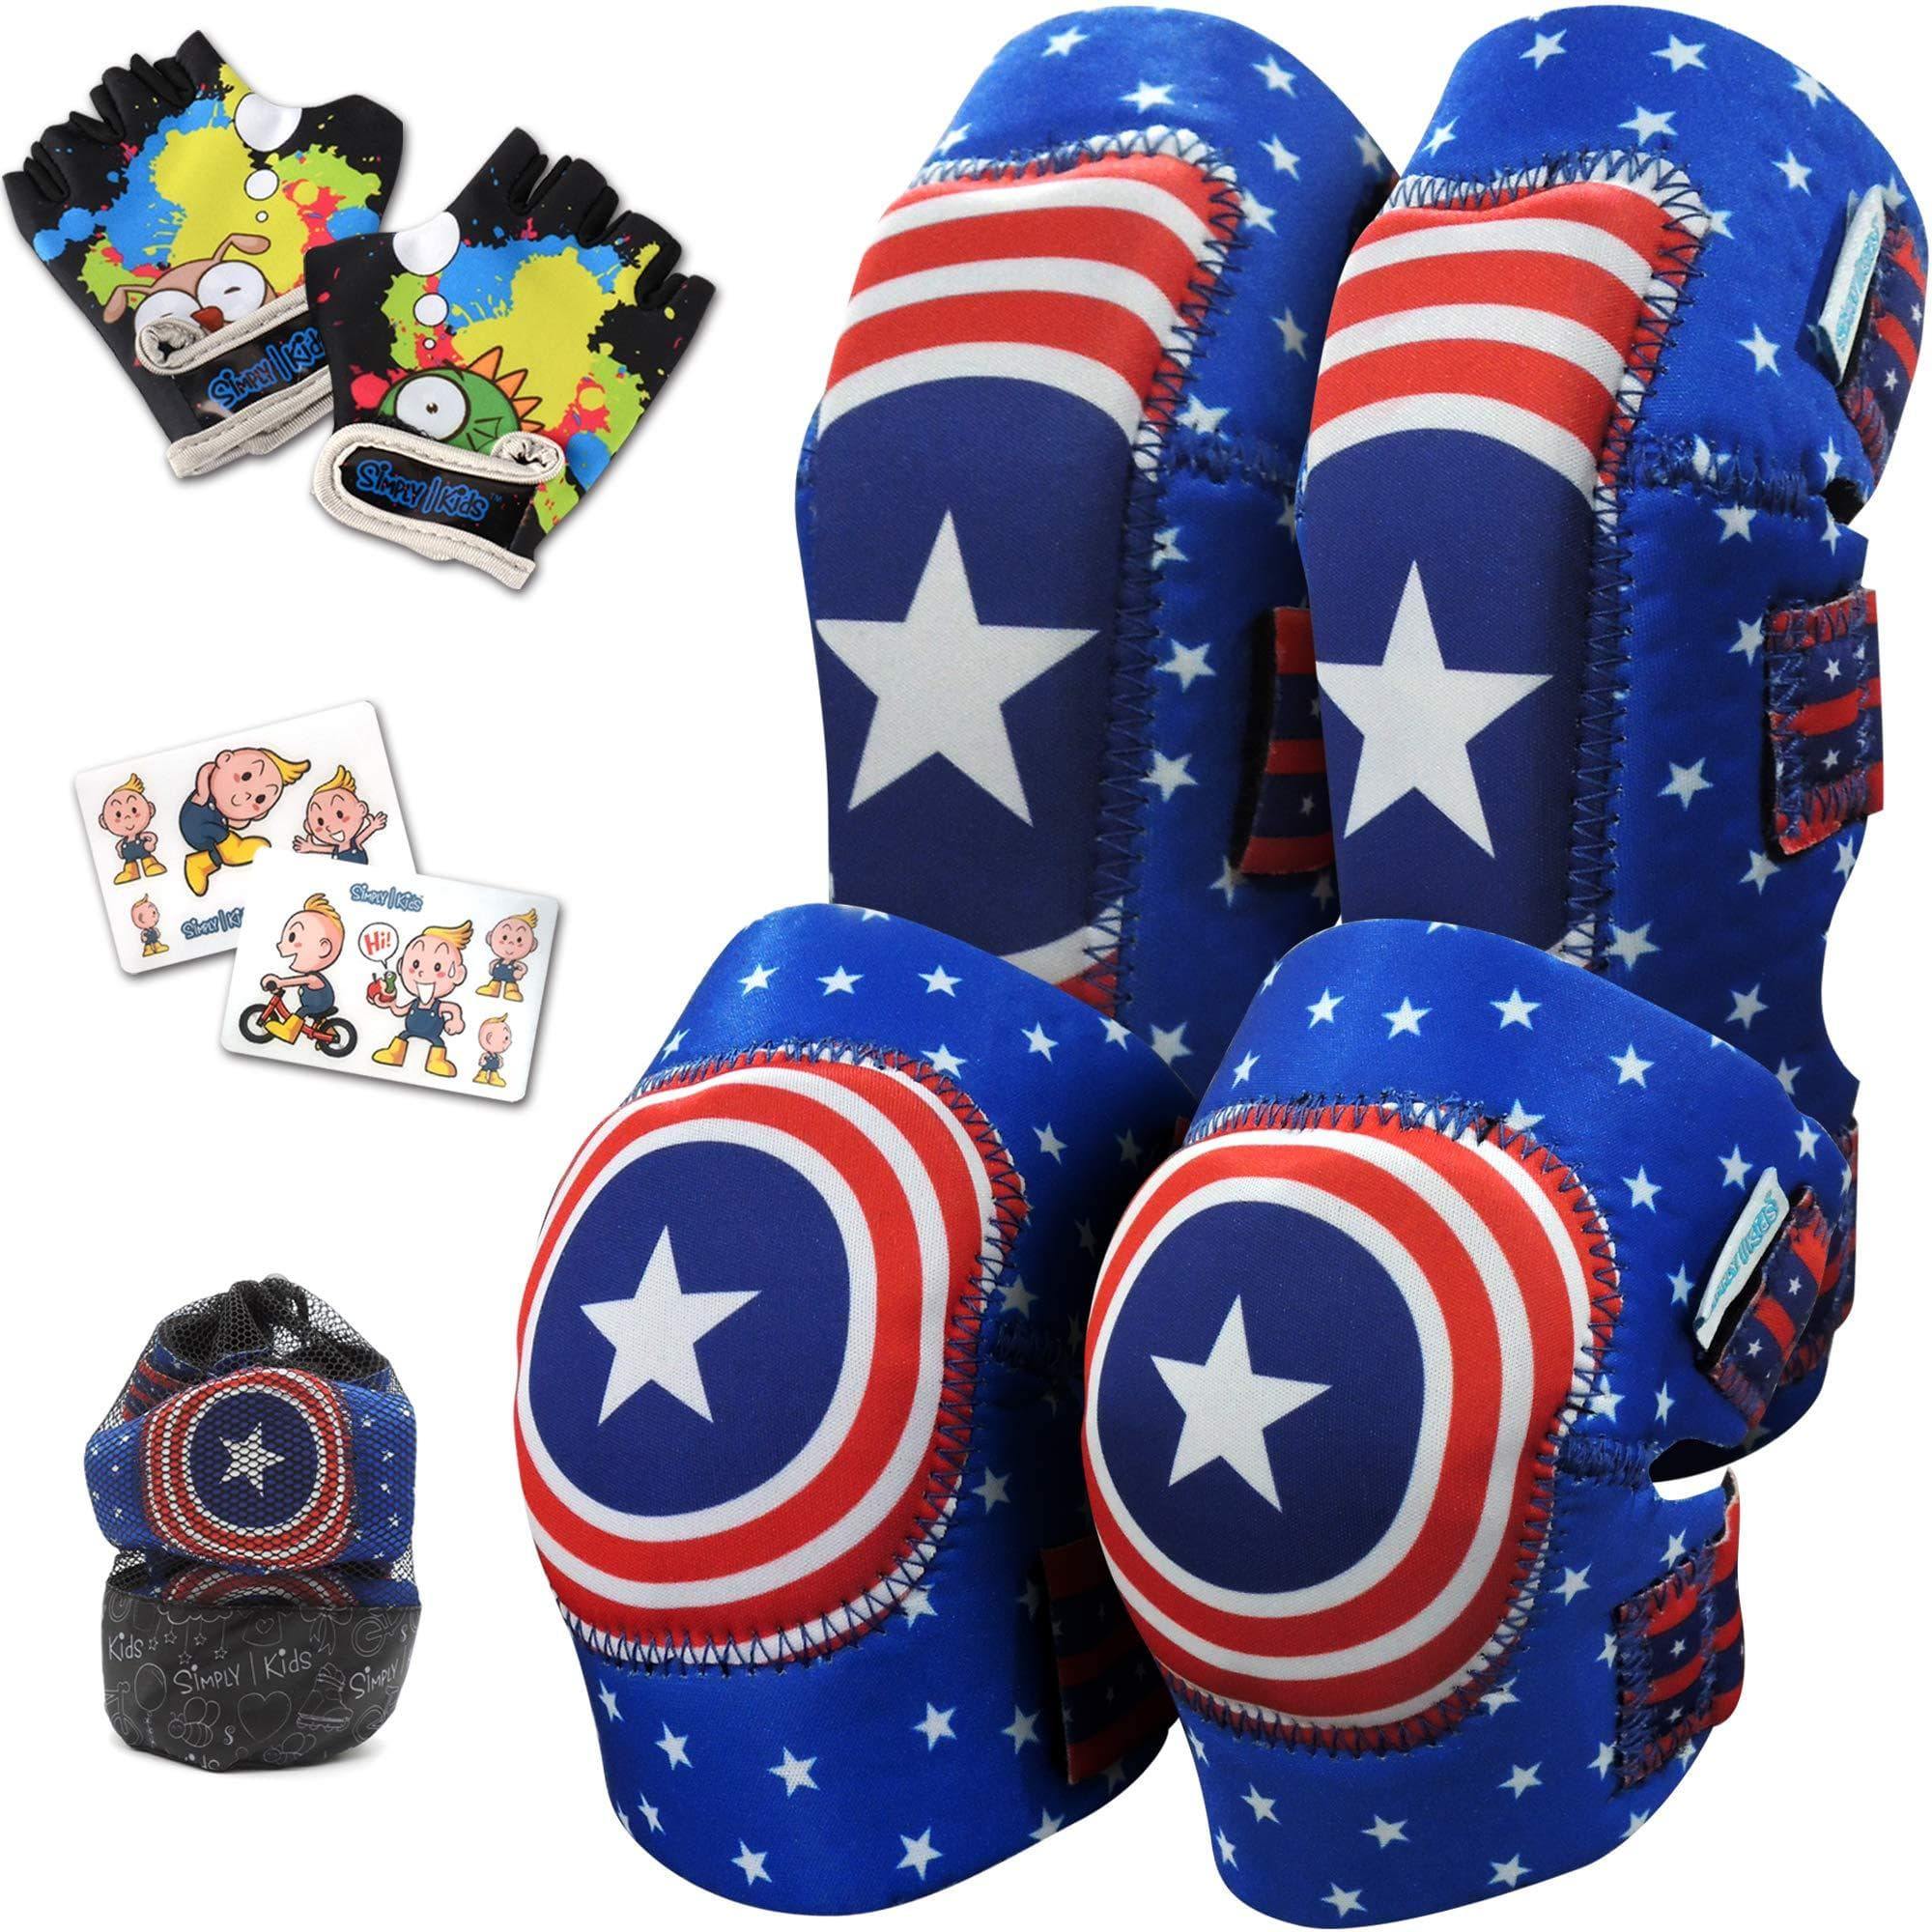 (Captain USA) Innovative Soft Kids Knee and Elbow Pads with Bike Gloves - Simply Kids